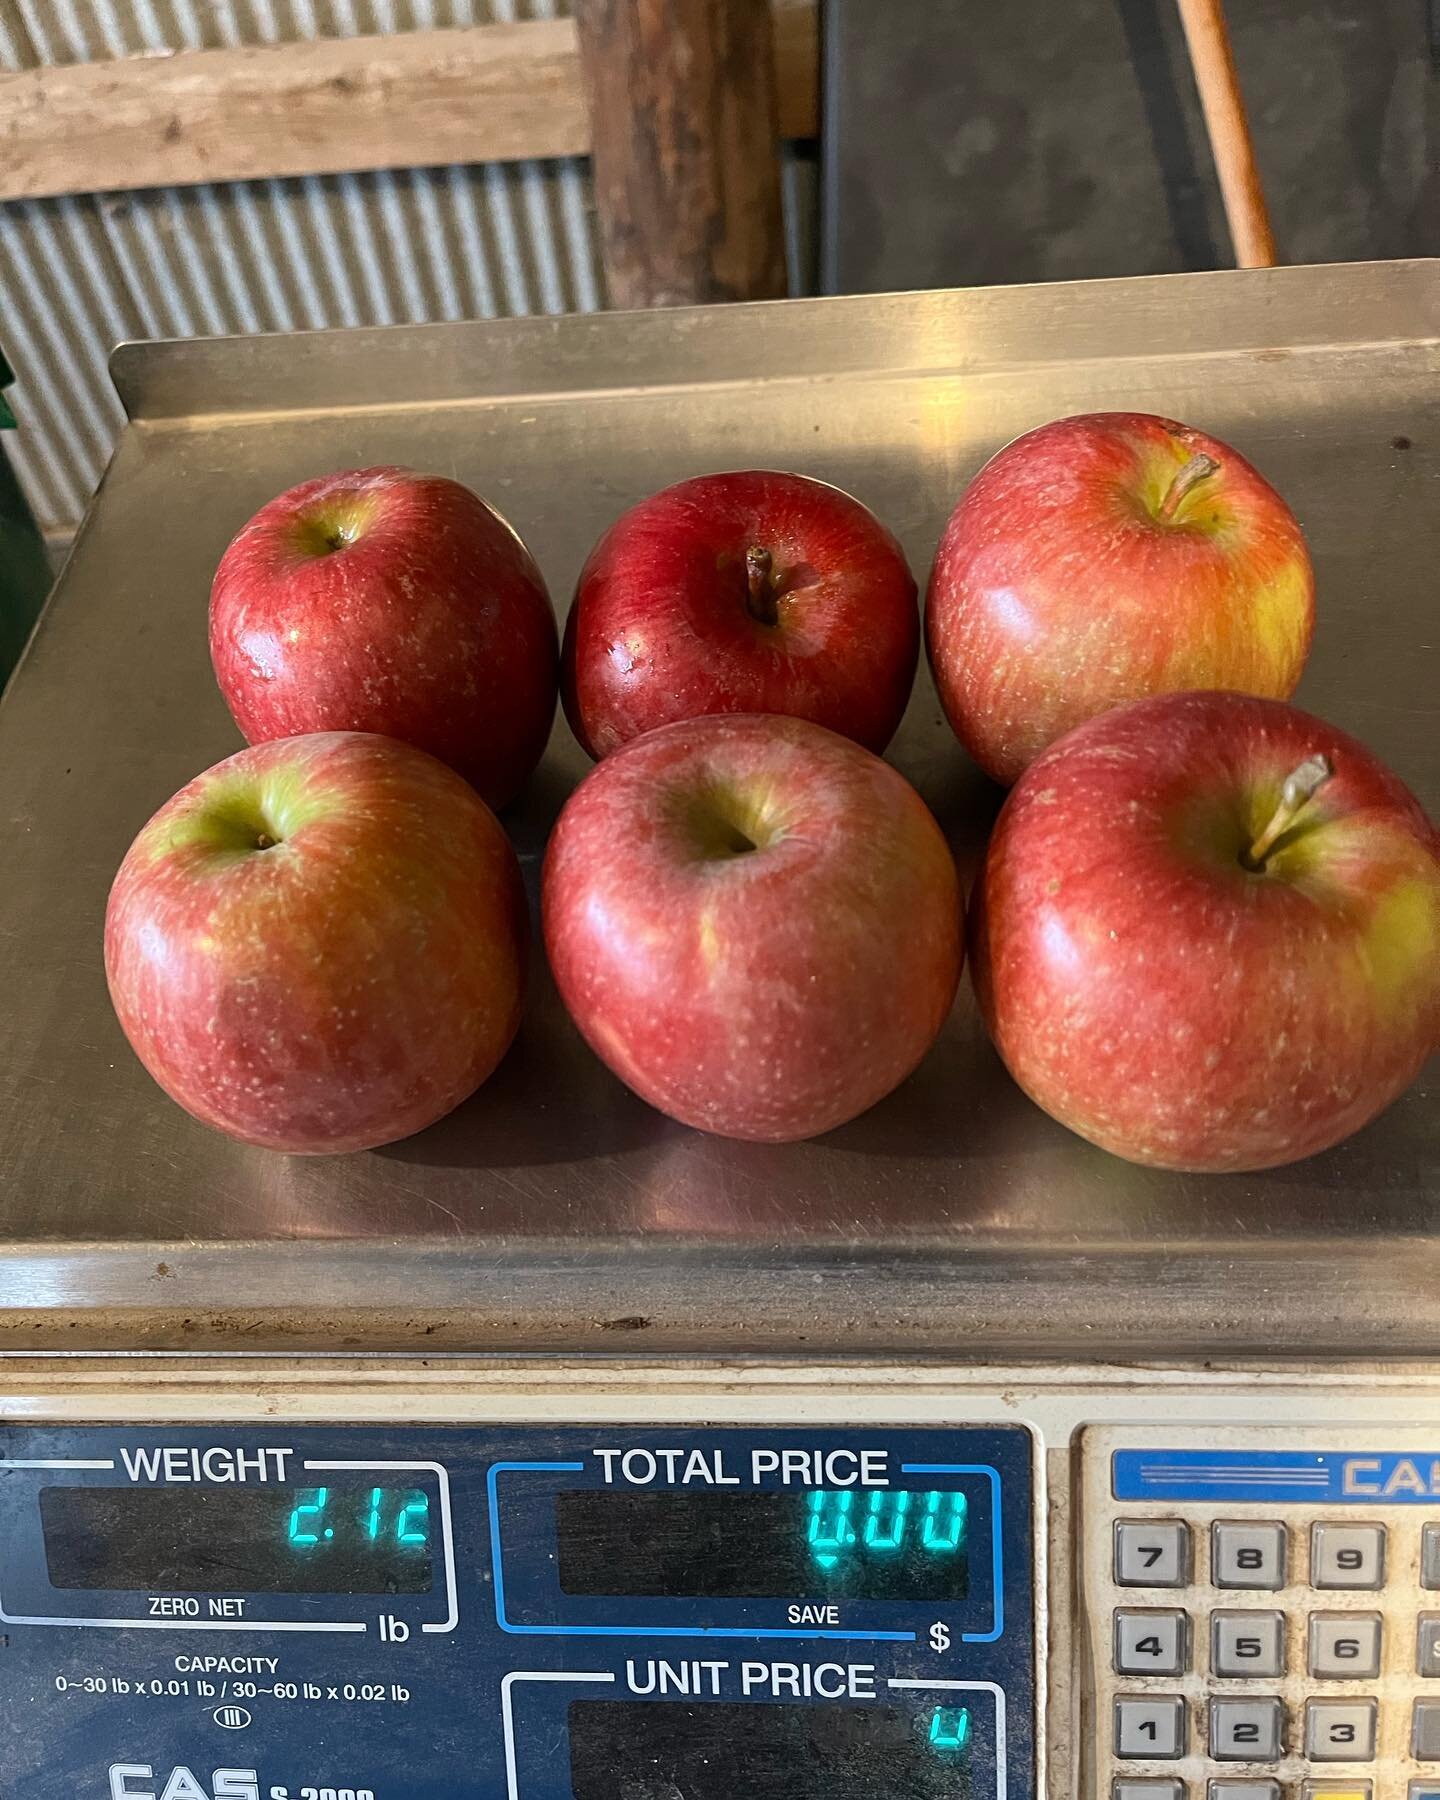 Apple sale! Although we have sold about 500 pounds of apples, we still have about 300 pounds of Haralson and 200 pounds of Regents left to sell. We will sell these at half price 2 pounds for one dollar until they are gone. 

Look forward to seeing yo